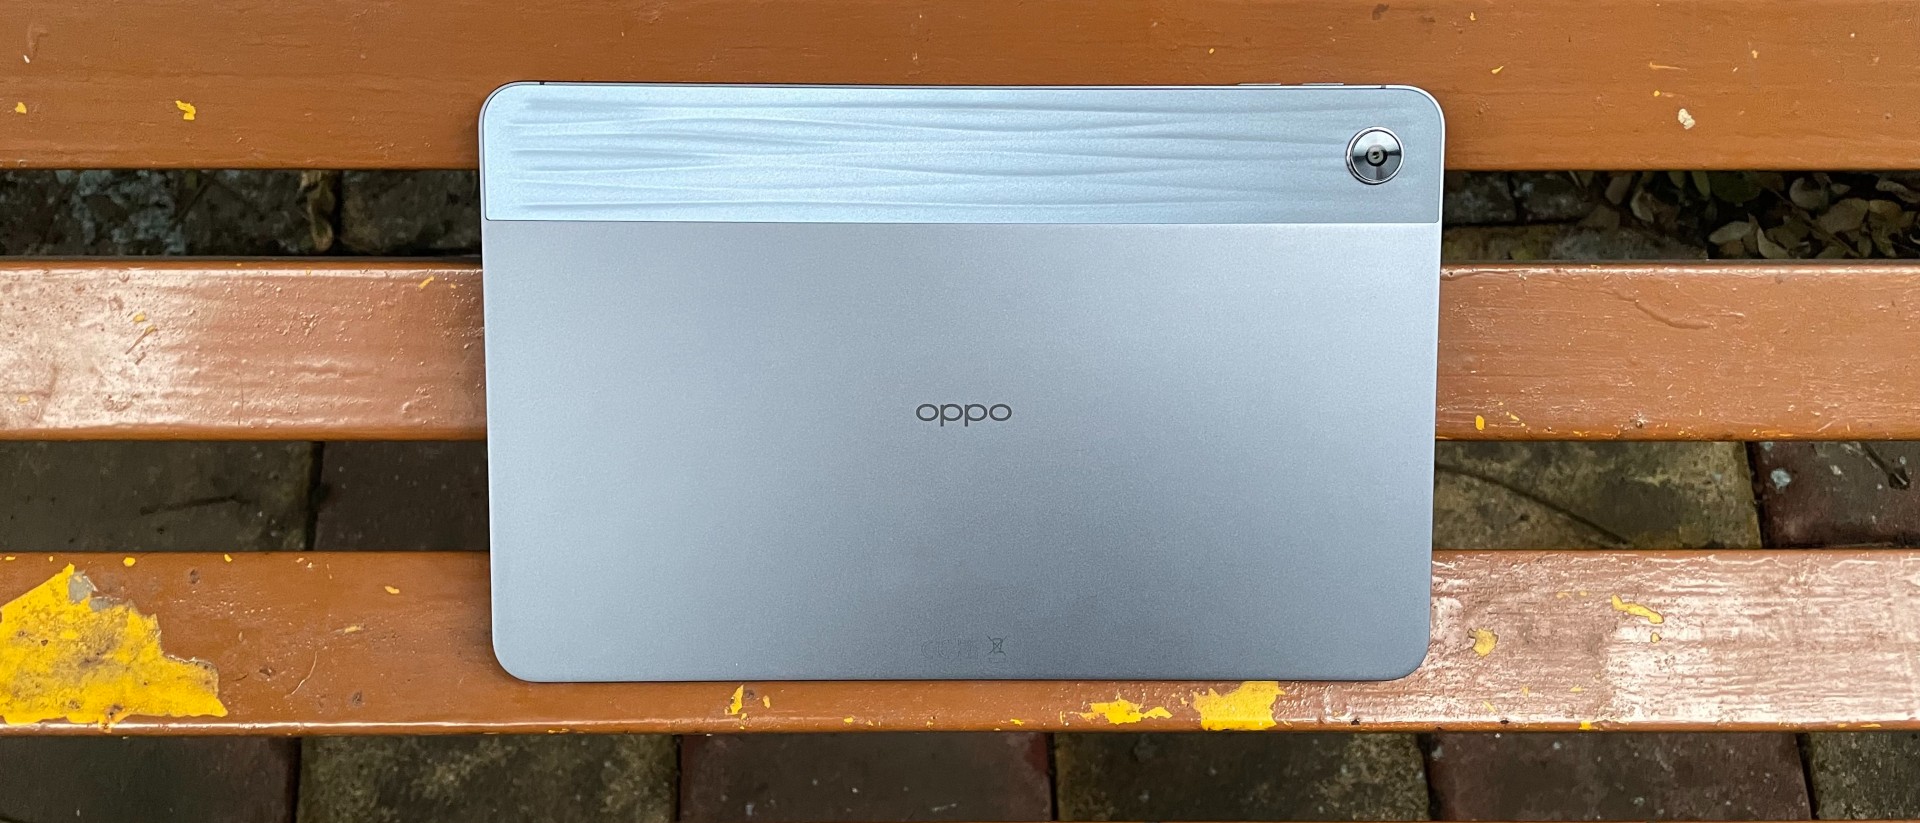 The Oppo Pad 2 Is Definitely Worth Taking A Look At